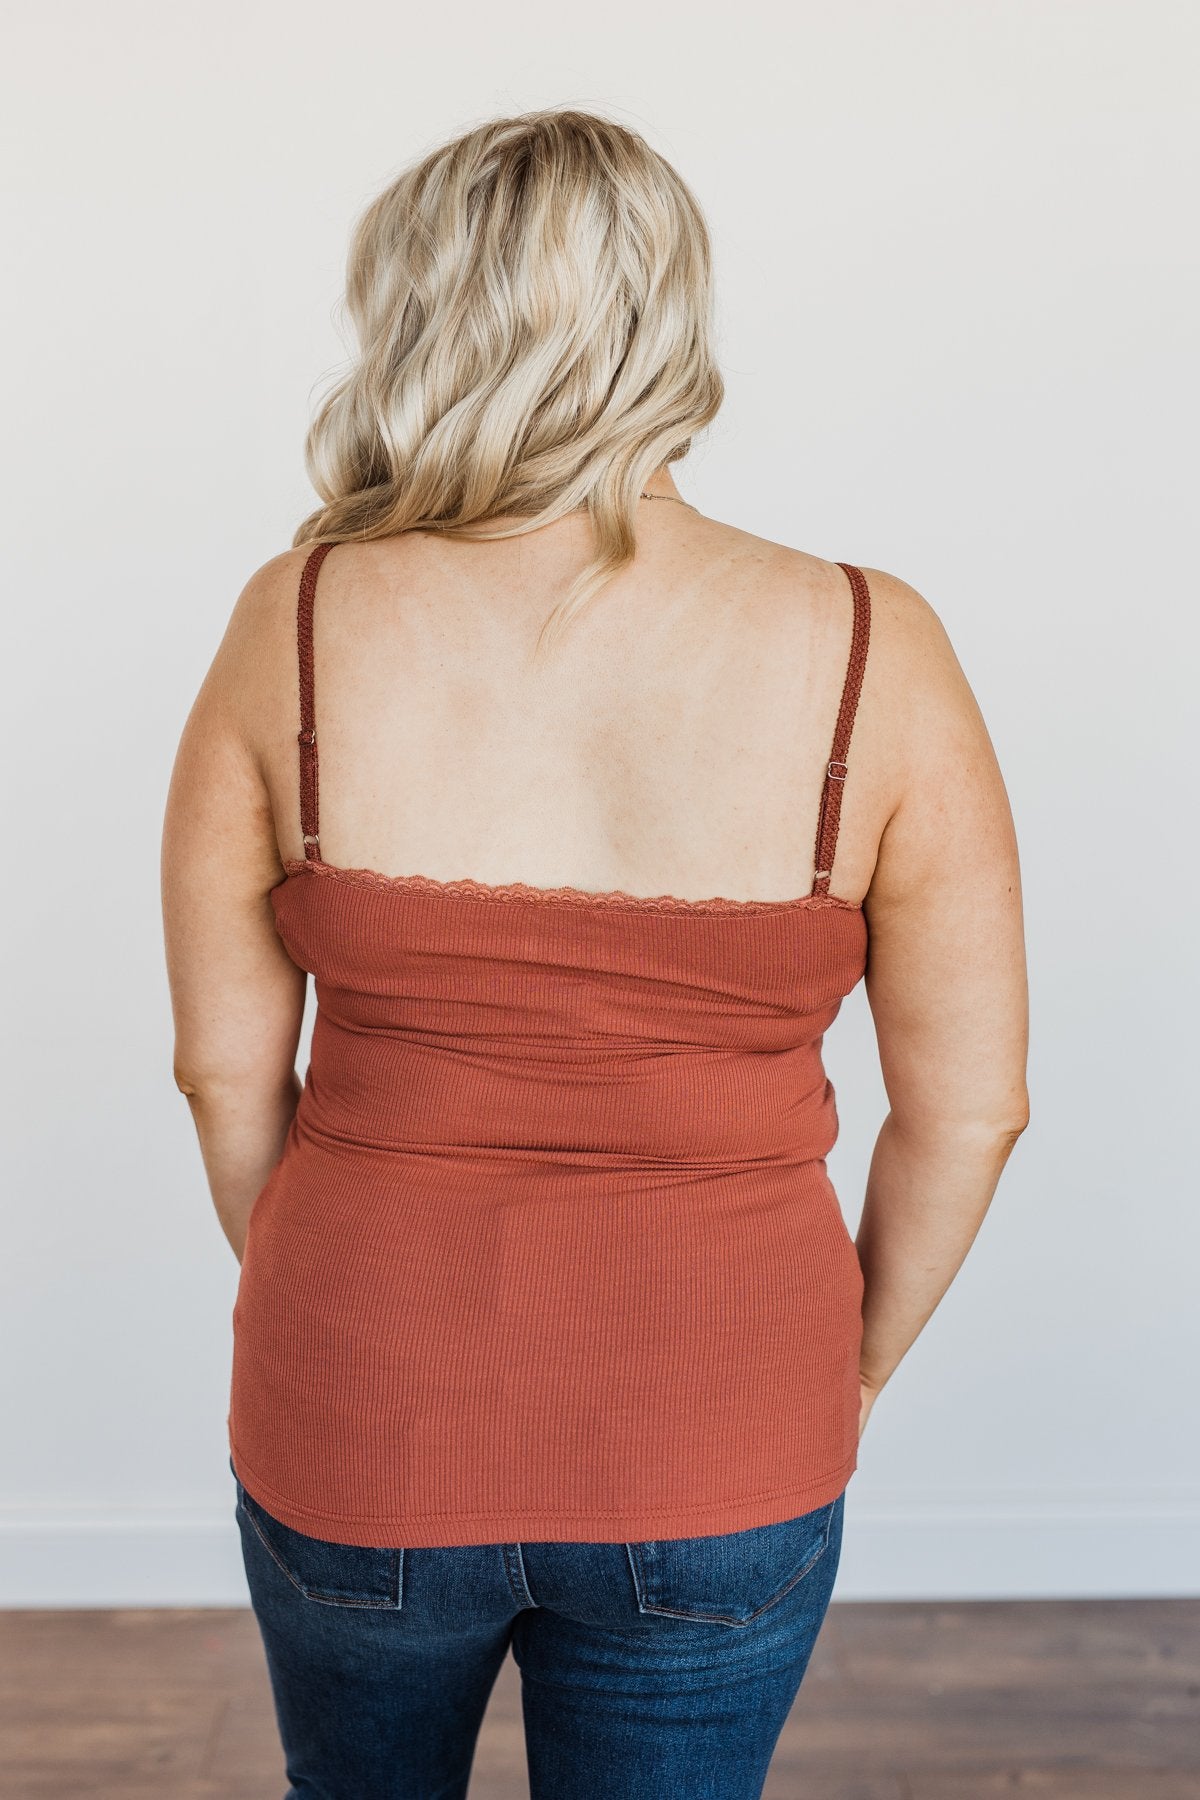 Pulse Basics Lace Trimmed Tank Top- Clay